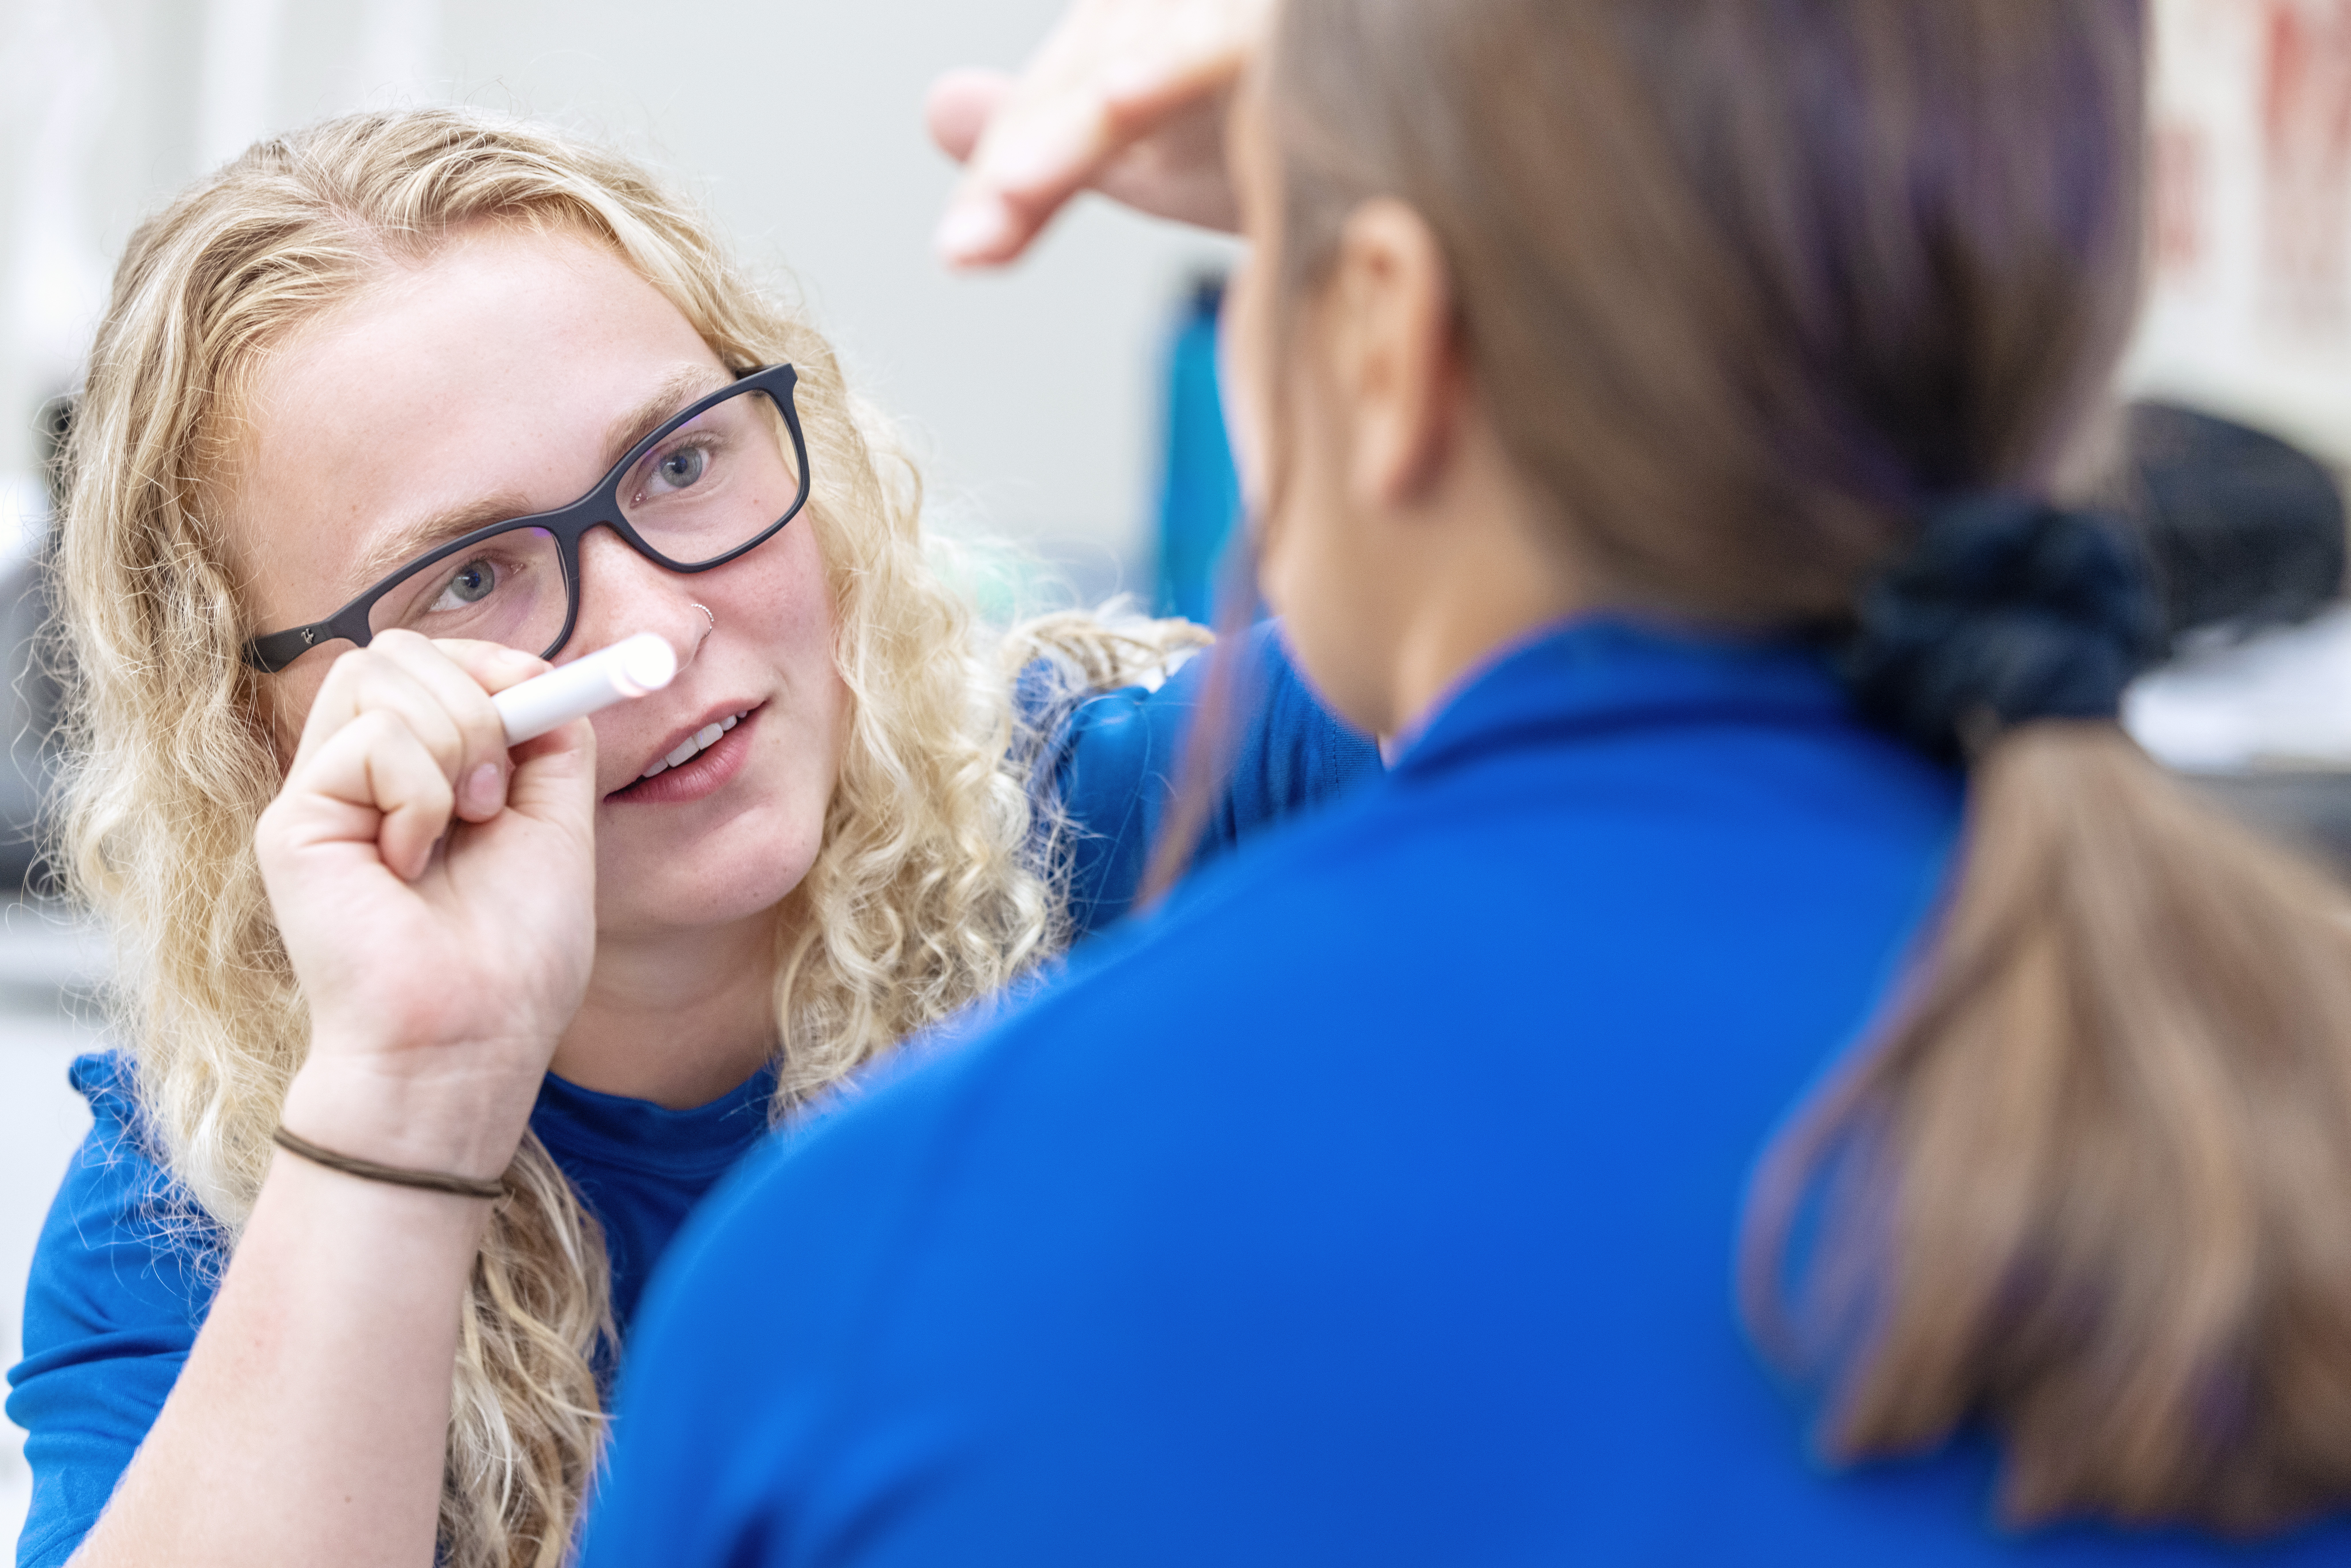 Master of Athletic Training student performing practice eye exam on fellow student.